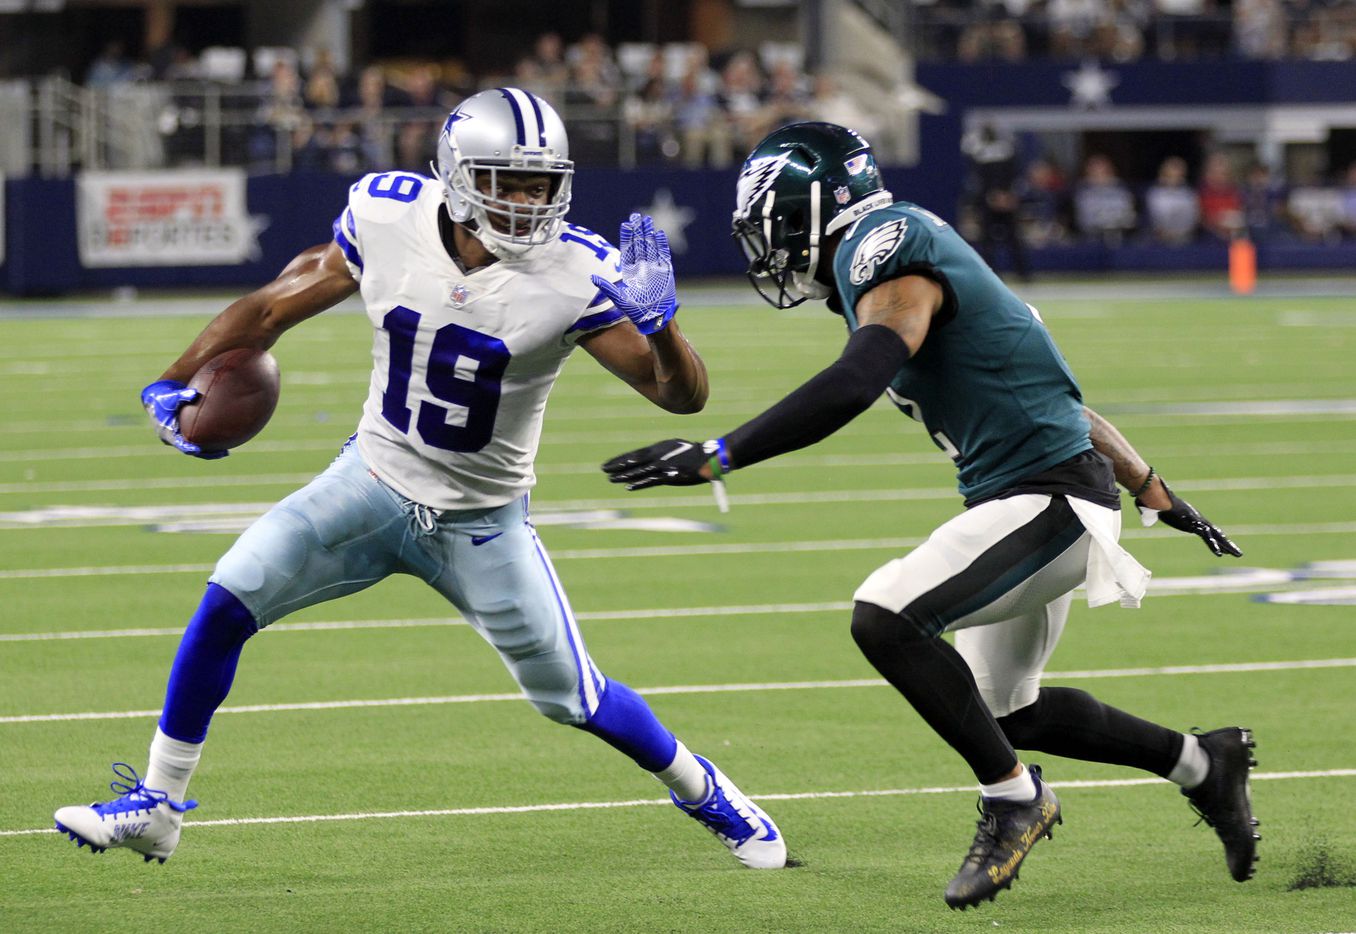 Dallas Cowboys wide receiver Amari Cooper (19) tries to elude a Philadelphia Eagle defender, after a catch, during the first half of a NFL football game at AT&T Stadium in Arlington on Monday, September 27, 2021. (John F. Rhodes / Special Contributor)